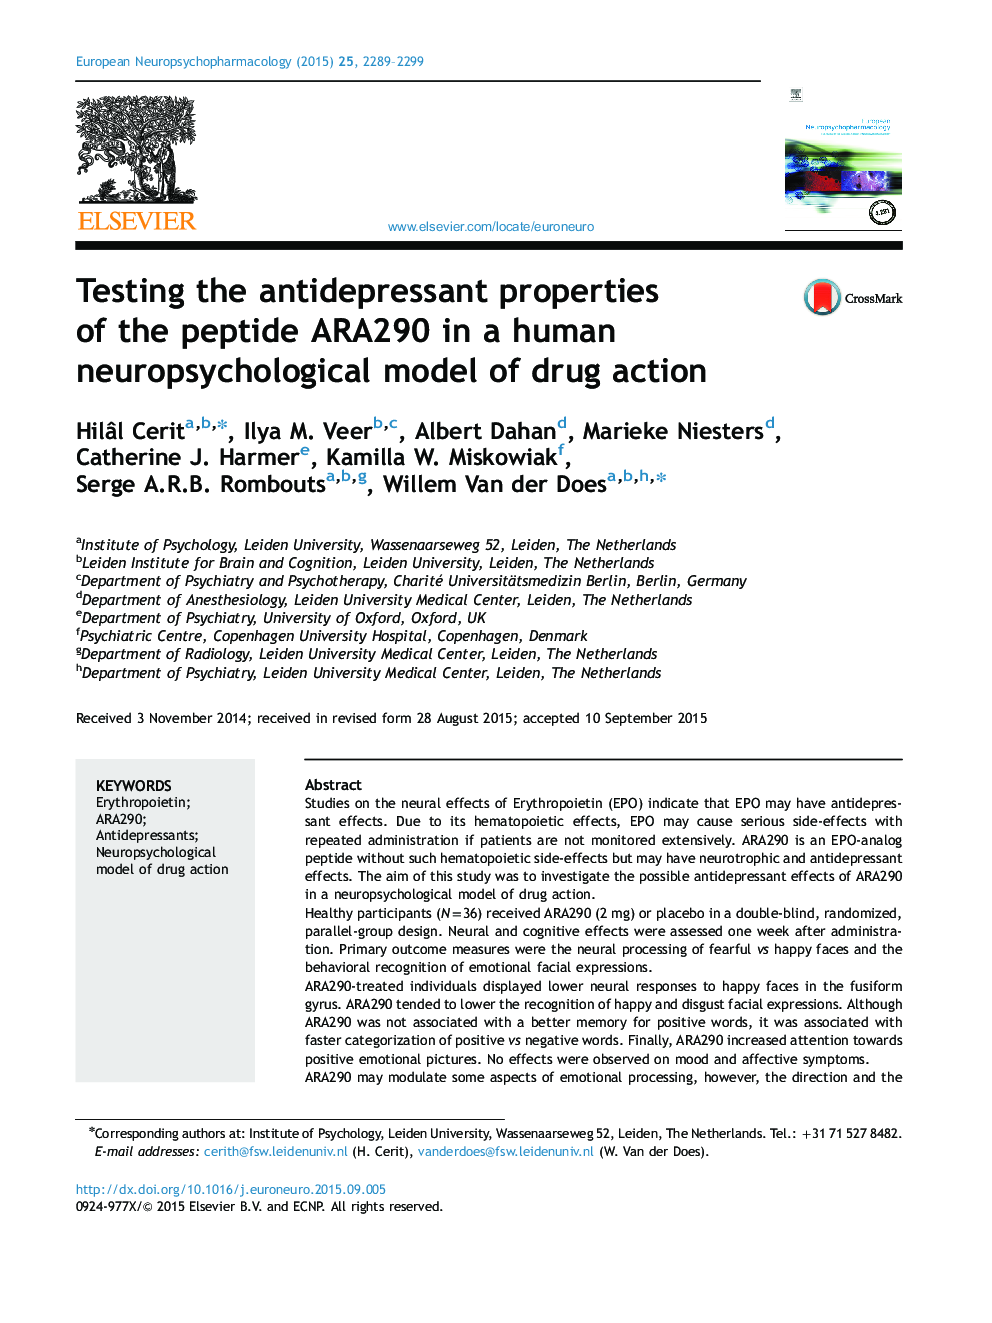 Testing the antidepressant properties of the peptide ARA290 in a human neuropsychological model of drug action